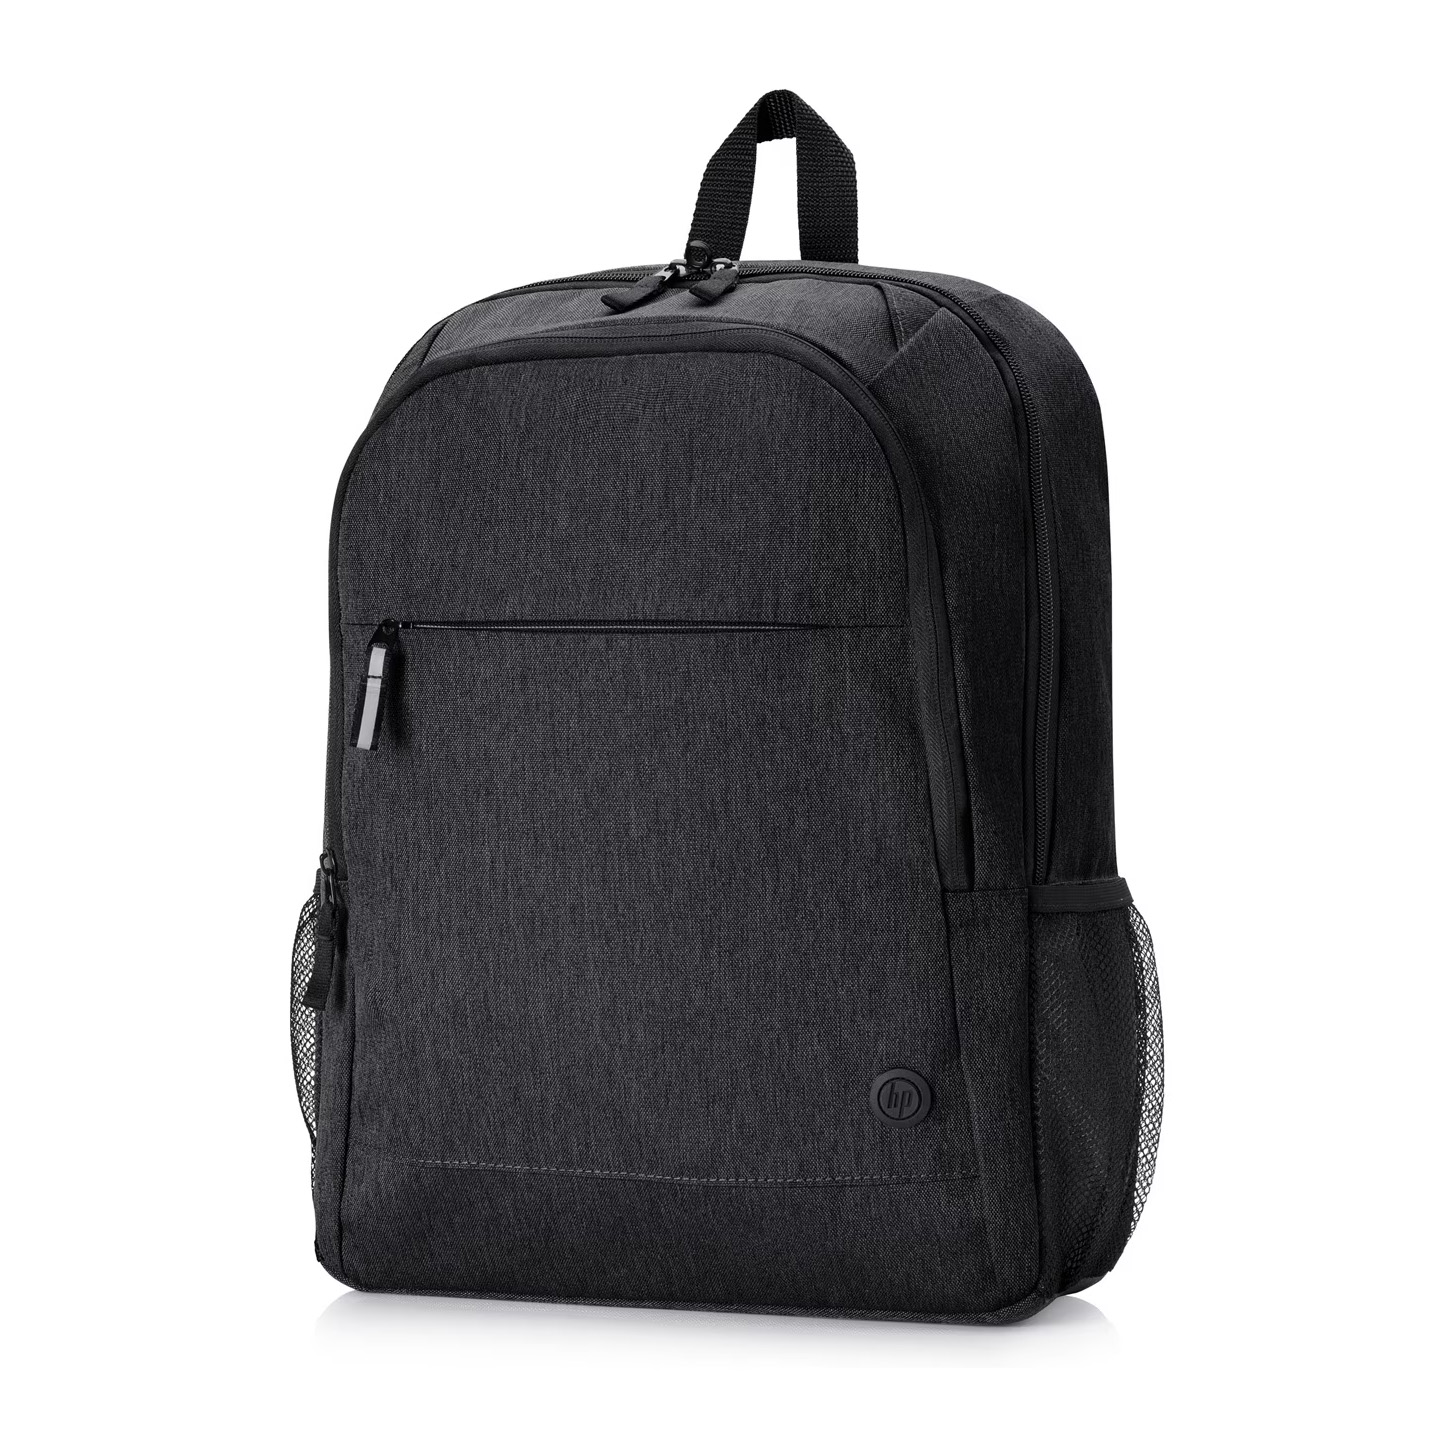 HP Prelude Pro 15.6inch backpack